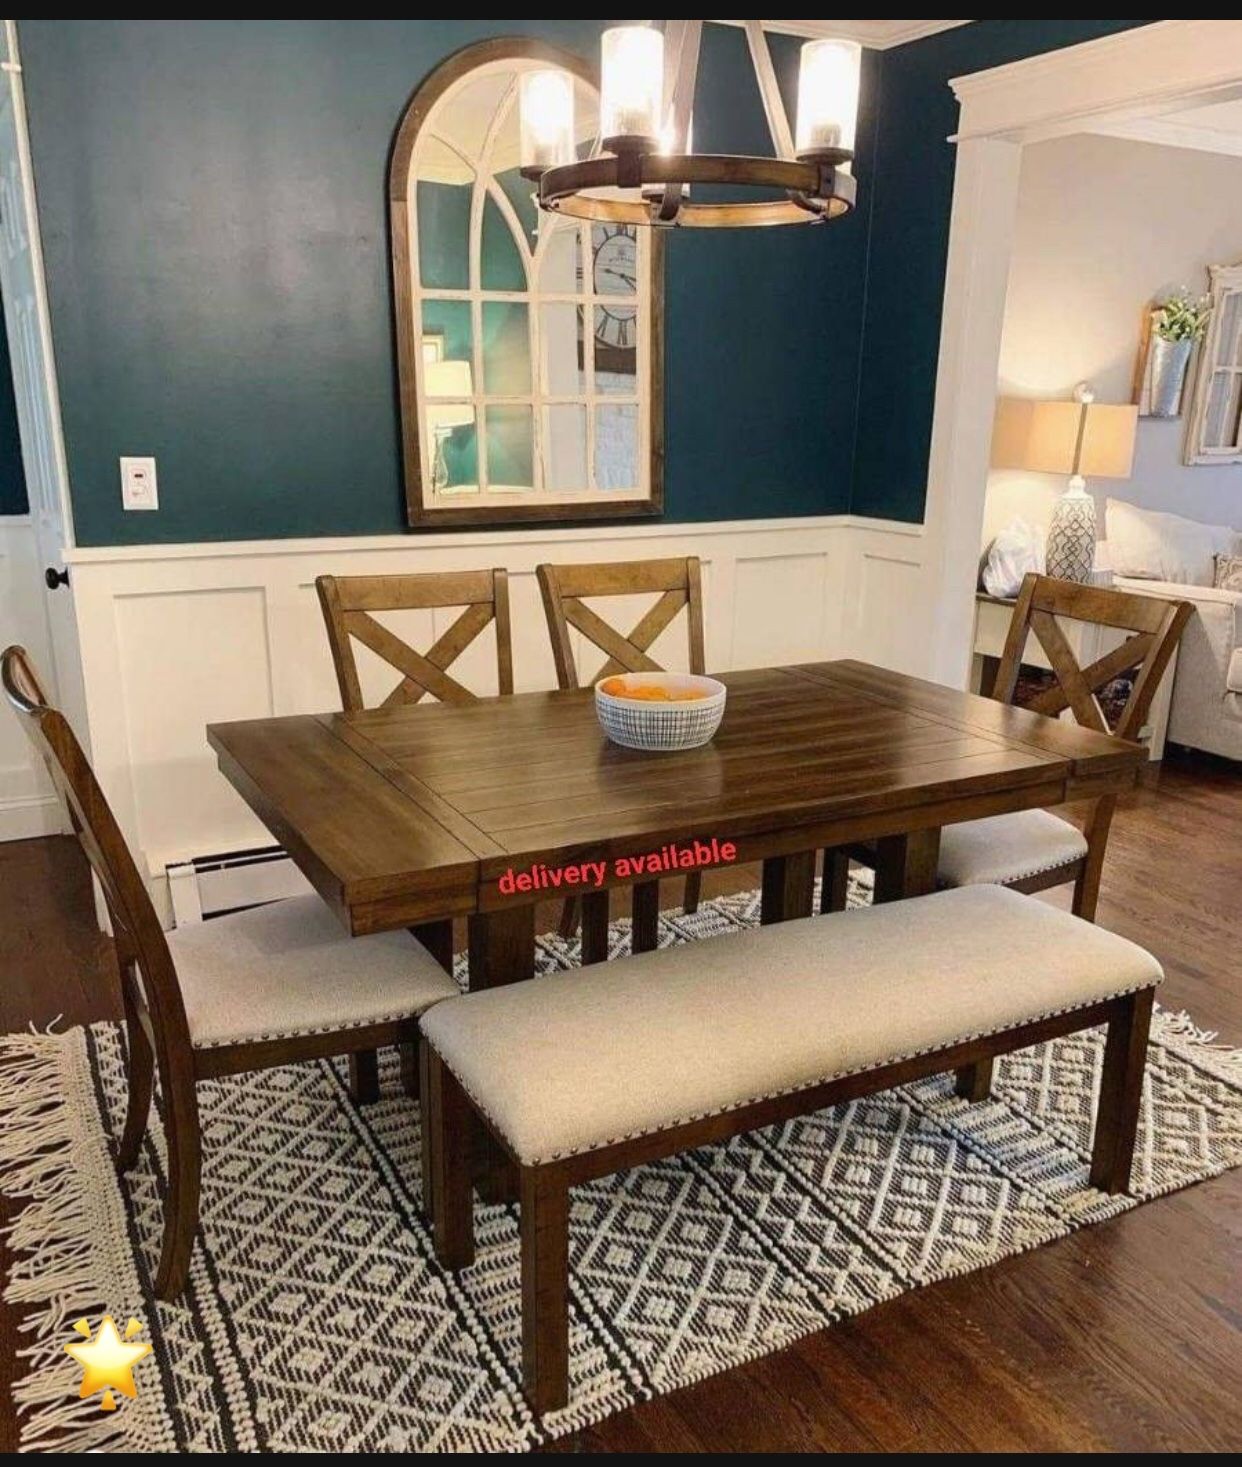 Grayish Brown Casual Style Rectangular Extension Dining Table & 4 Upholstered Bar Stools & Bench💥🤎 Newbrand 🆕 Dining Room /Kitchen🌟 